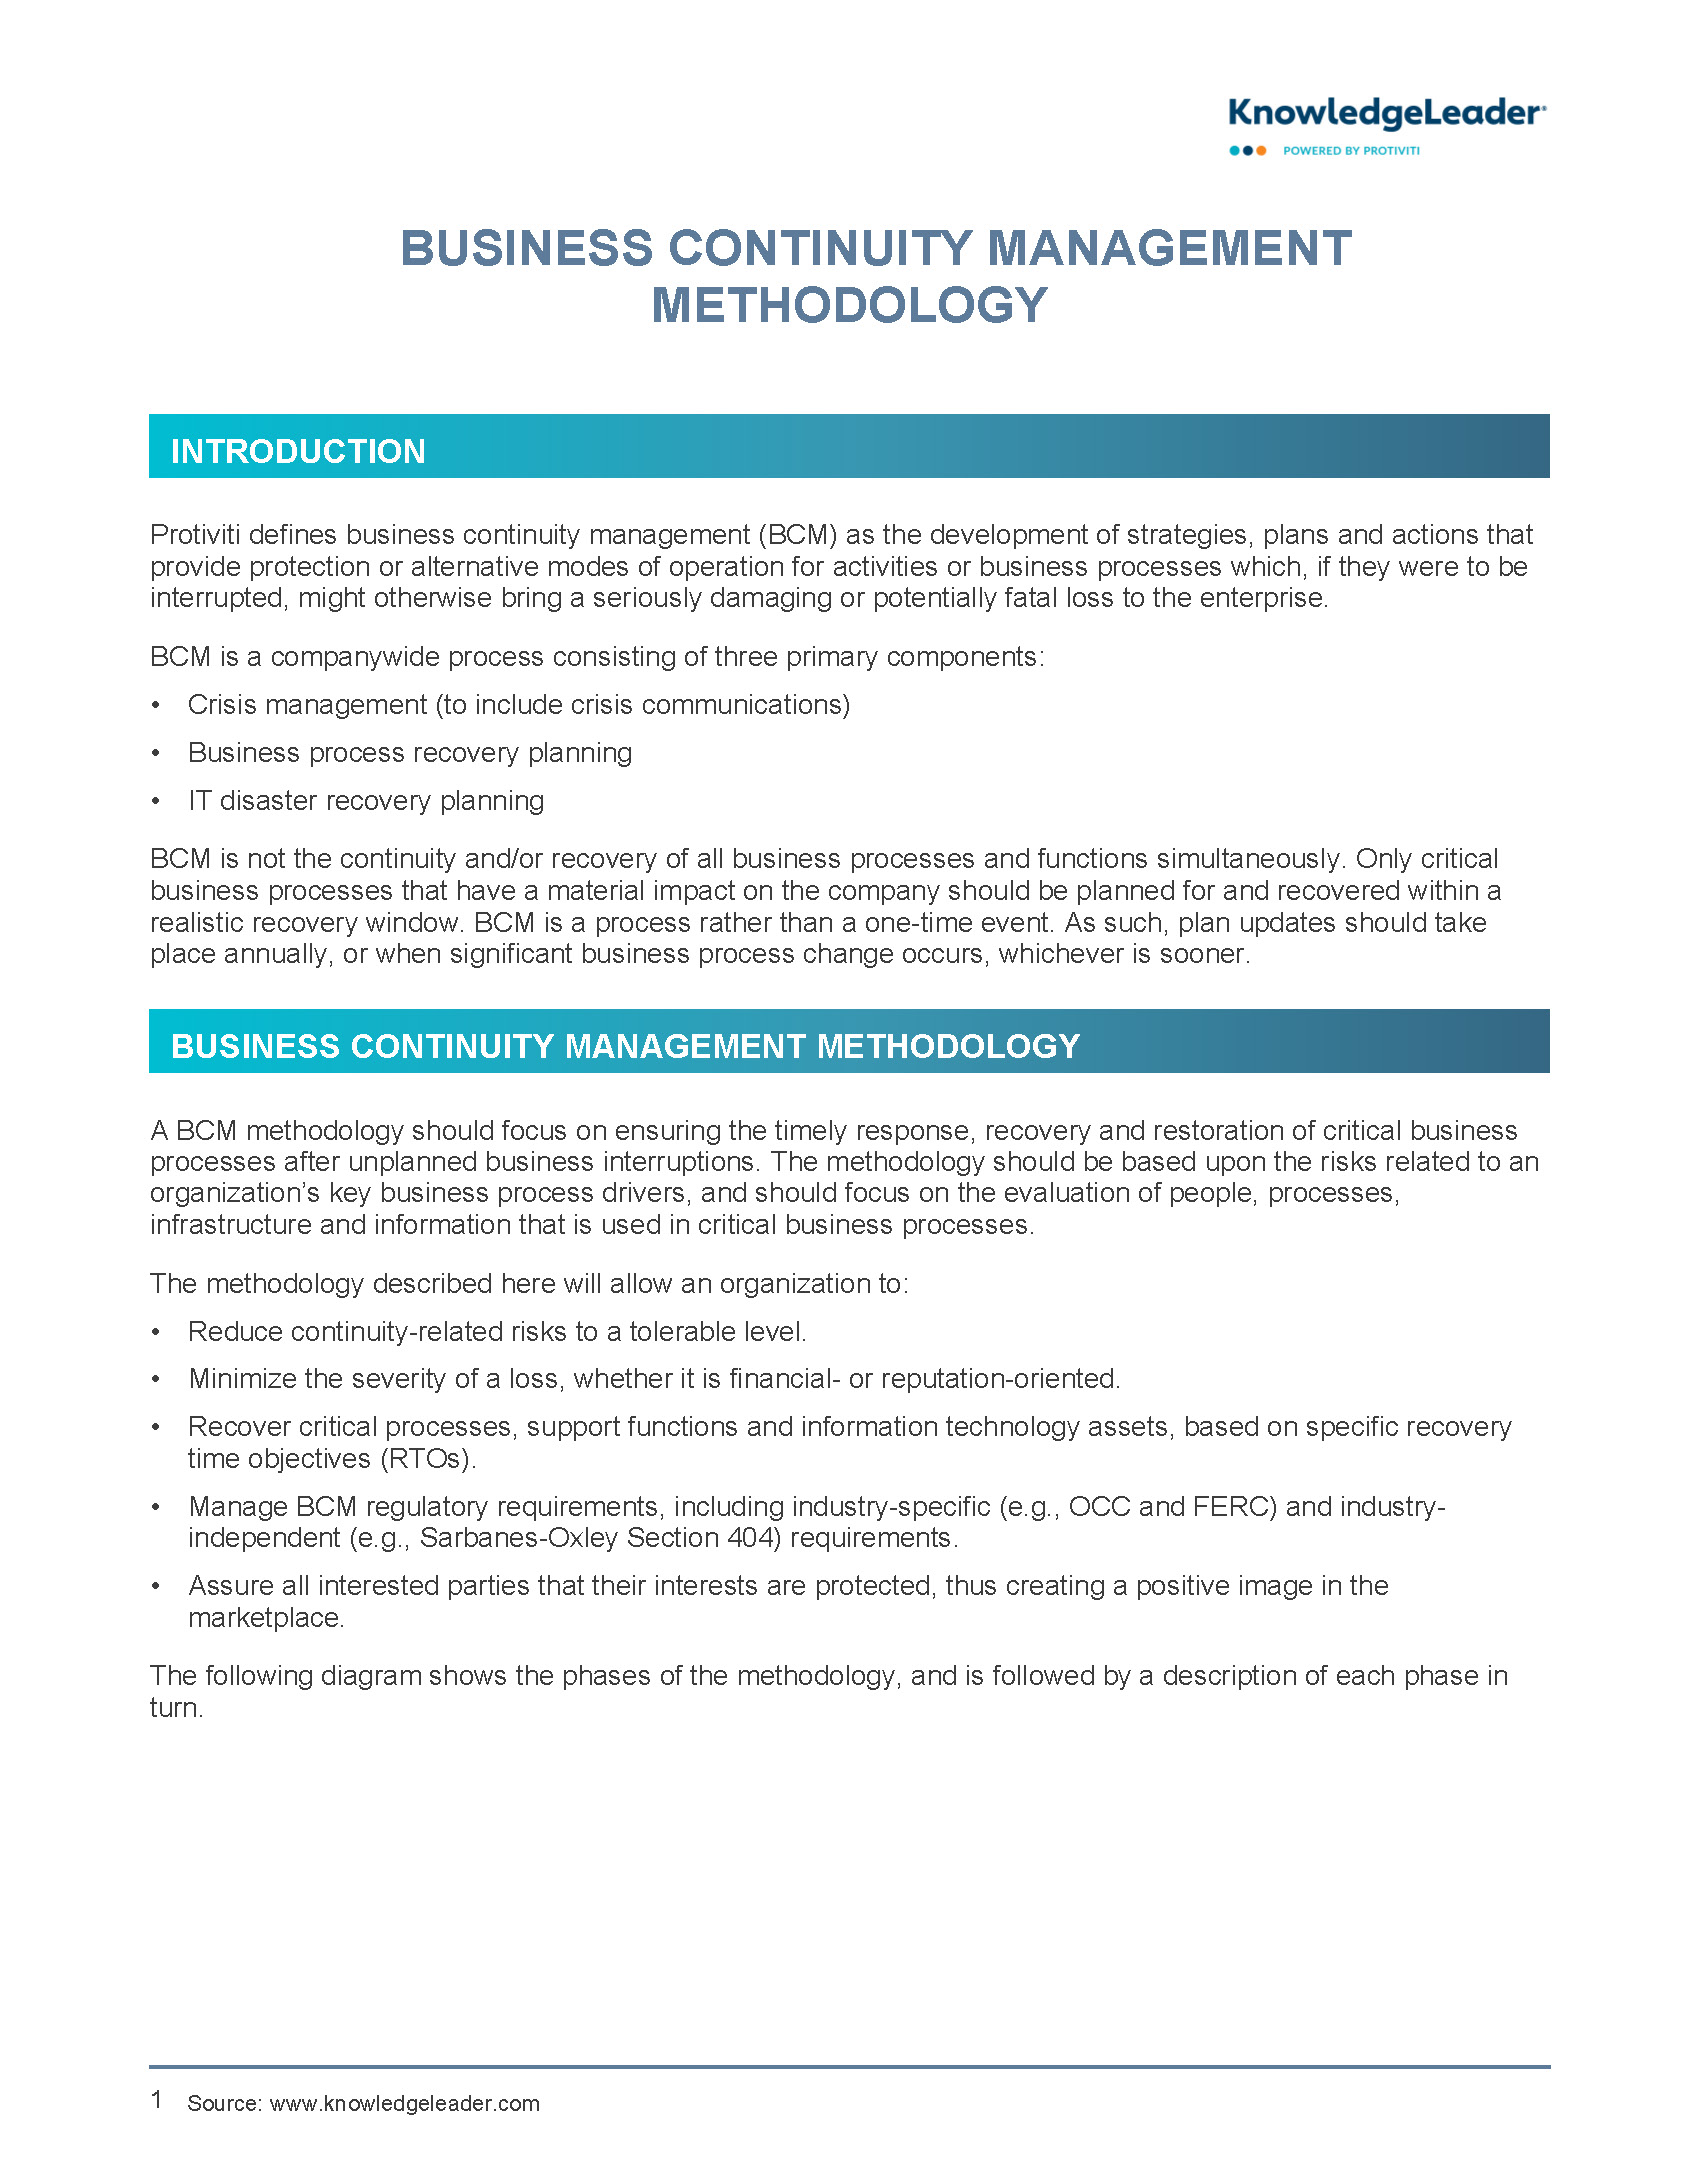 Screenshot of the first page of Business Continuity Management Methodology